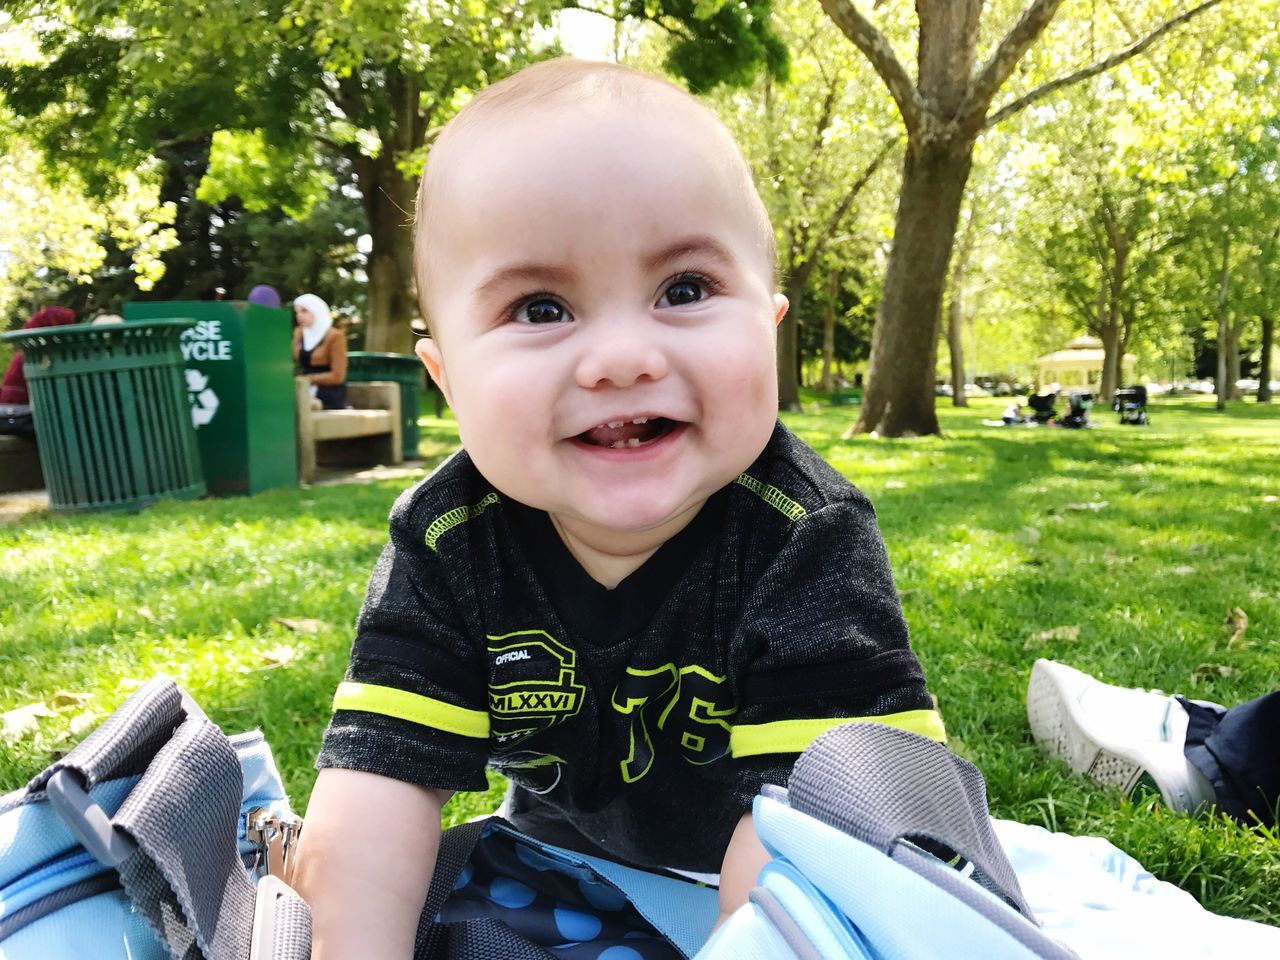 baby, portrait, happiness, cute, looking at camera, smiling, toddler, fun, innocence, park - man made space, leisure activity, childhood, sitting, cheerful, babies only, real people, one person, people, day, outdoors, nature, human body part, adult